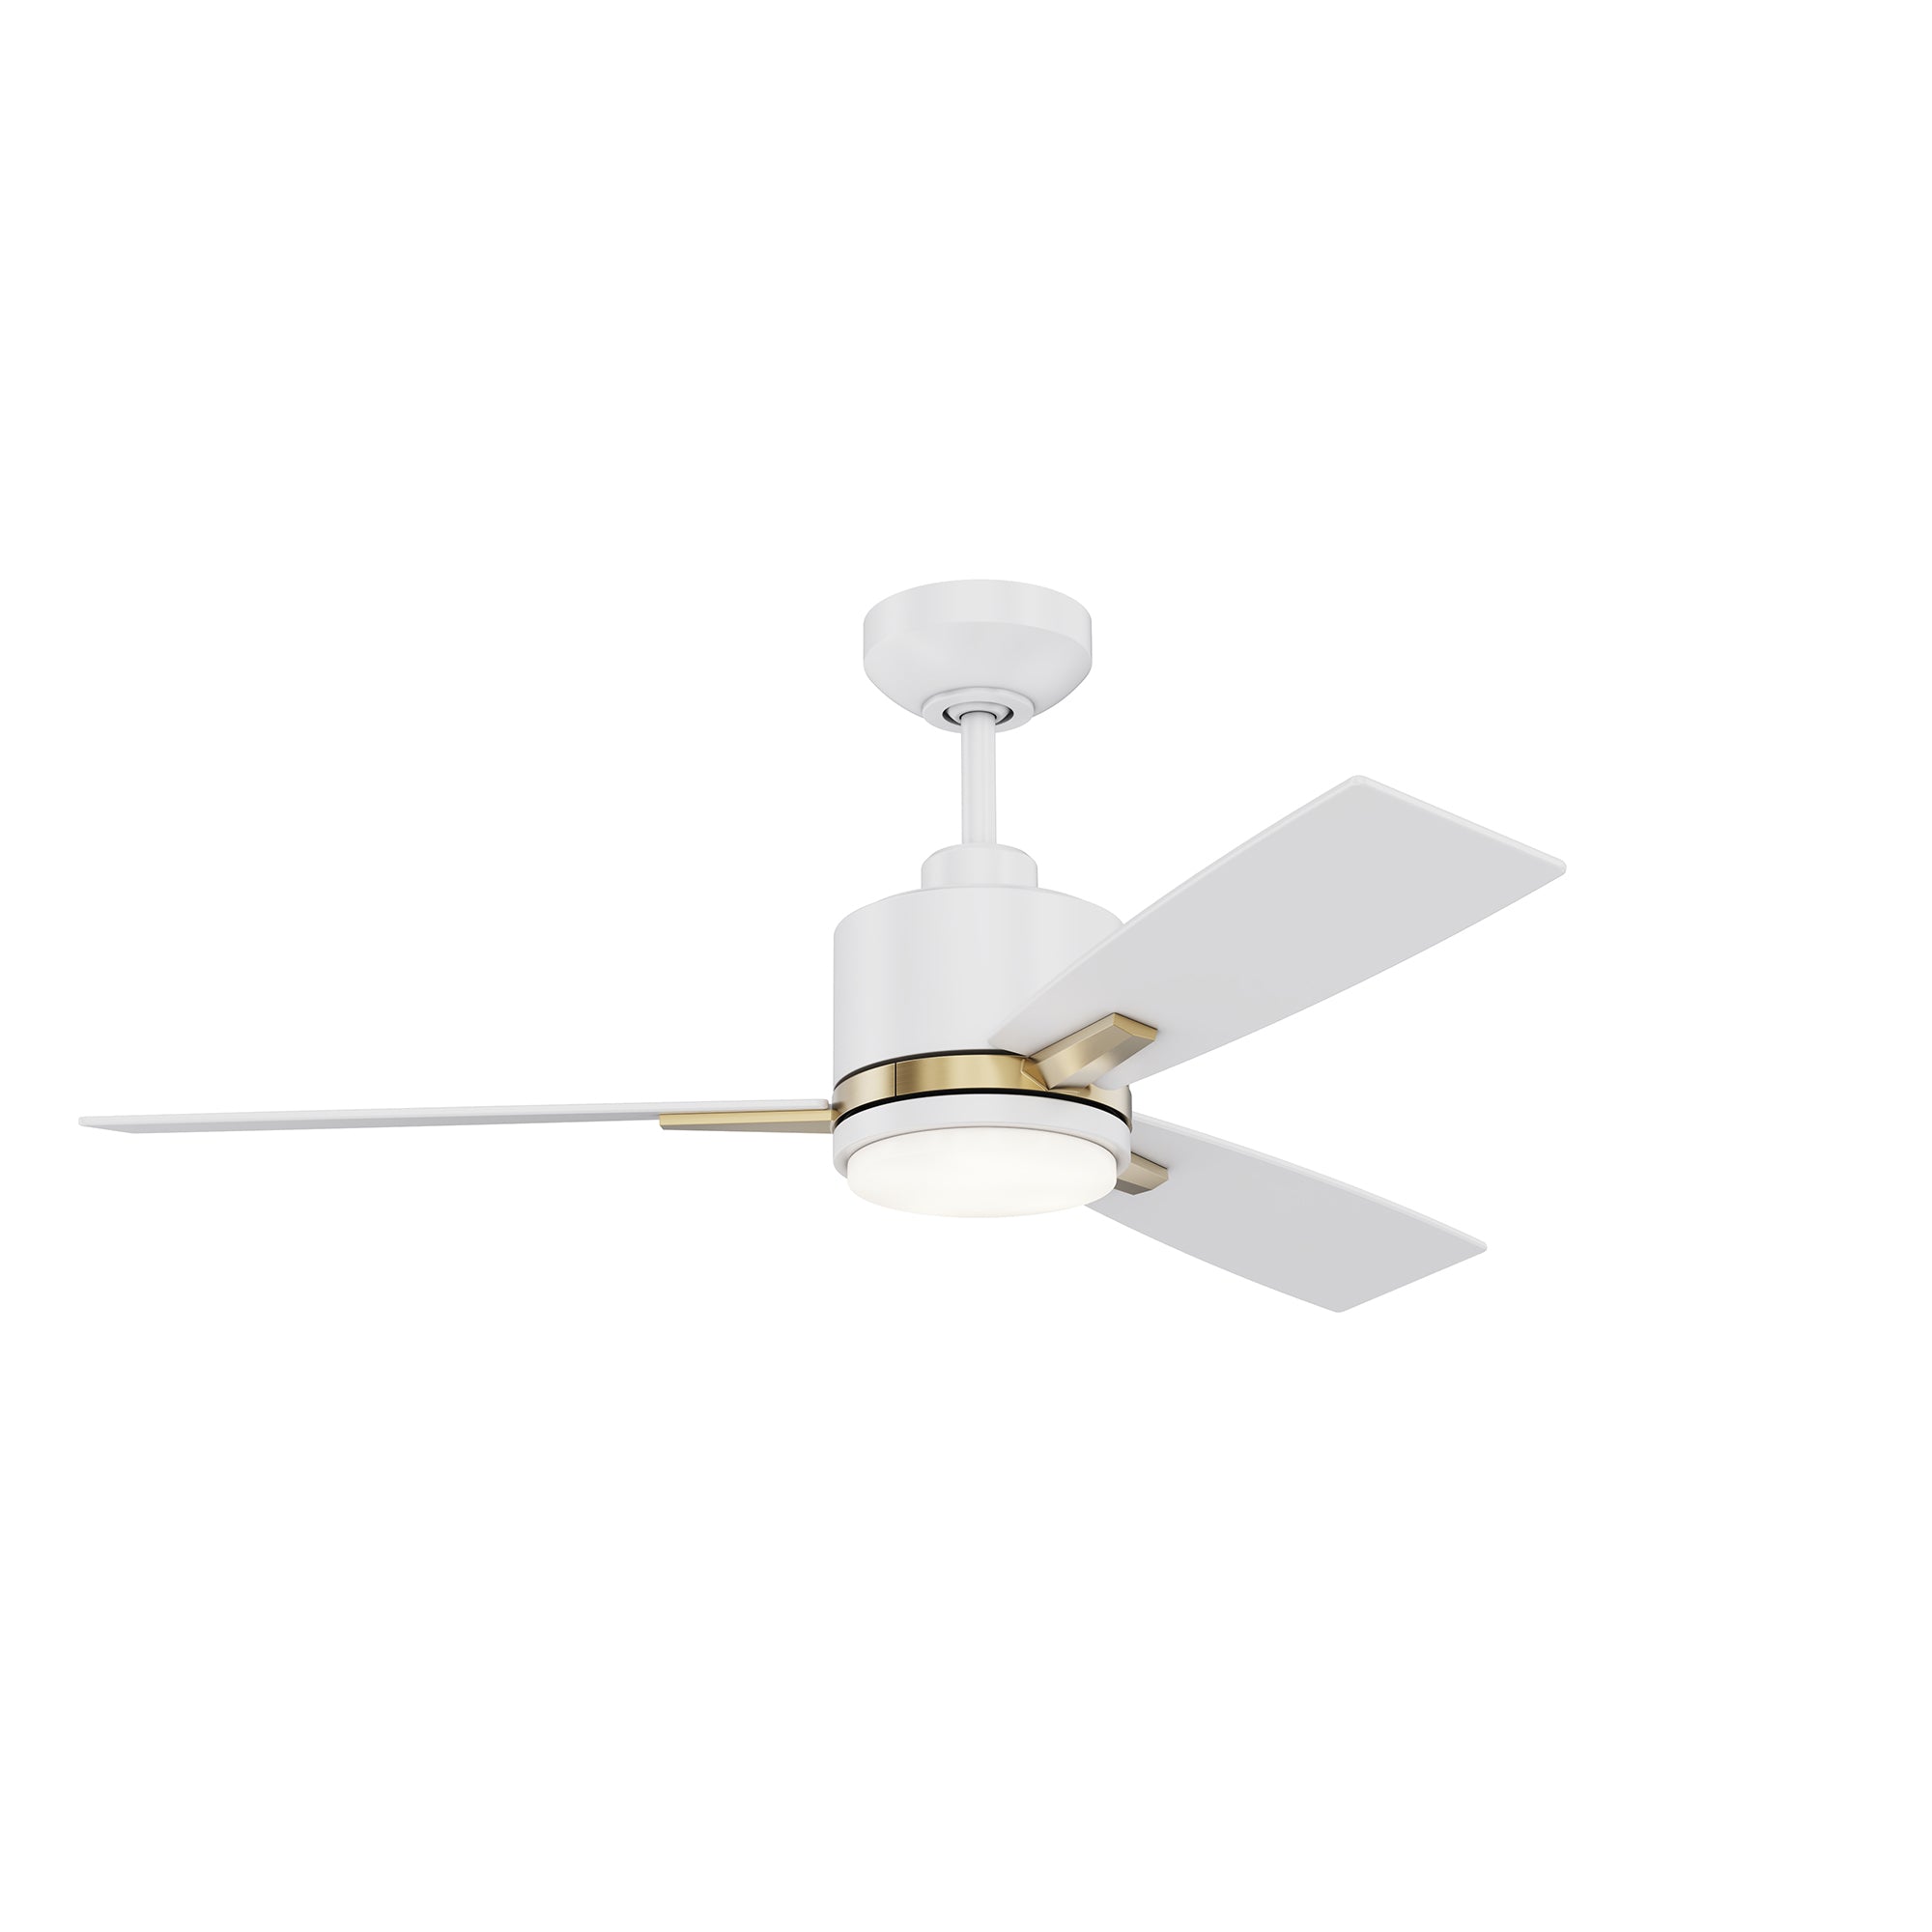 NUVEL Ceiling fan White, Gold INTEGRATED LED - AC30842-MWH/OCB | KENDAL